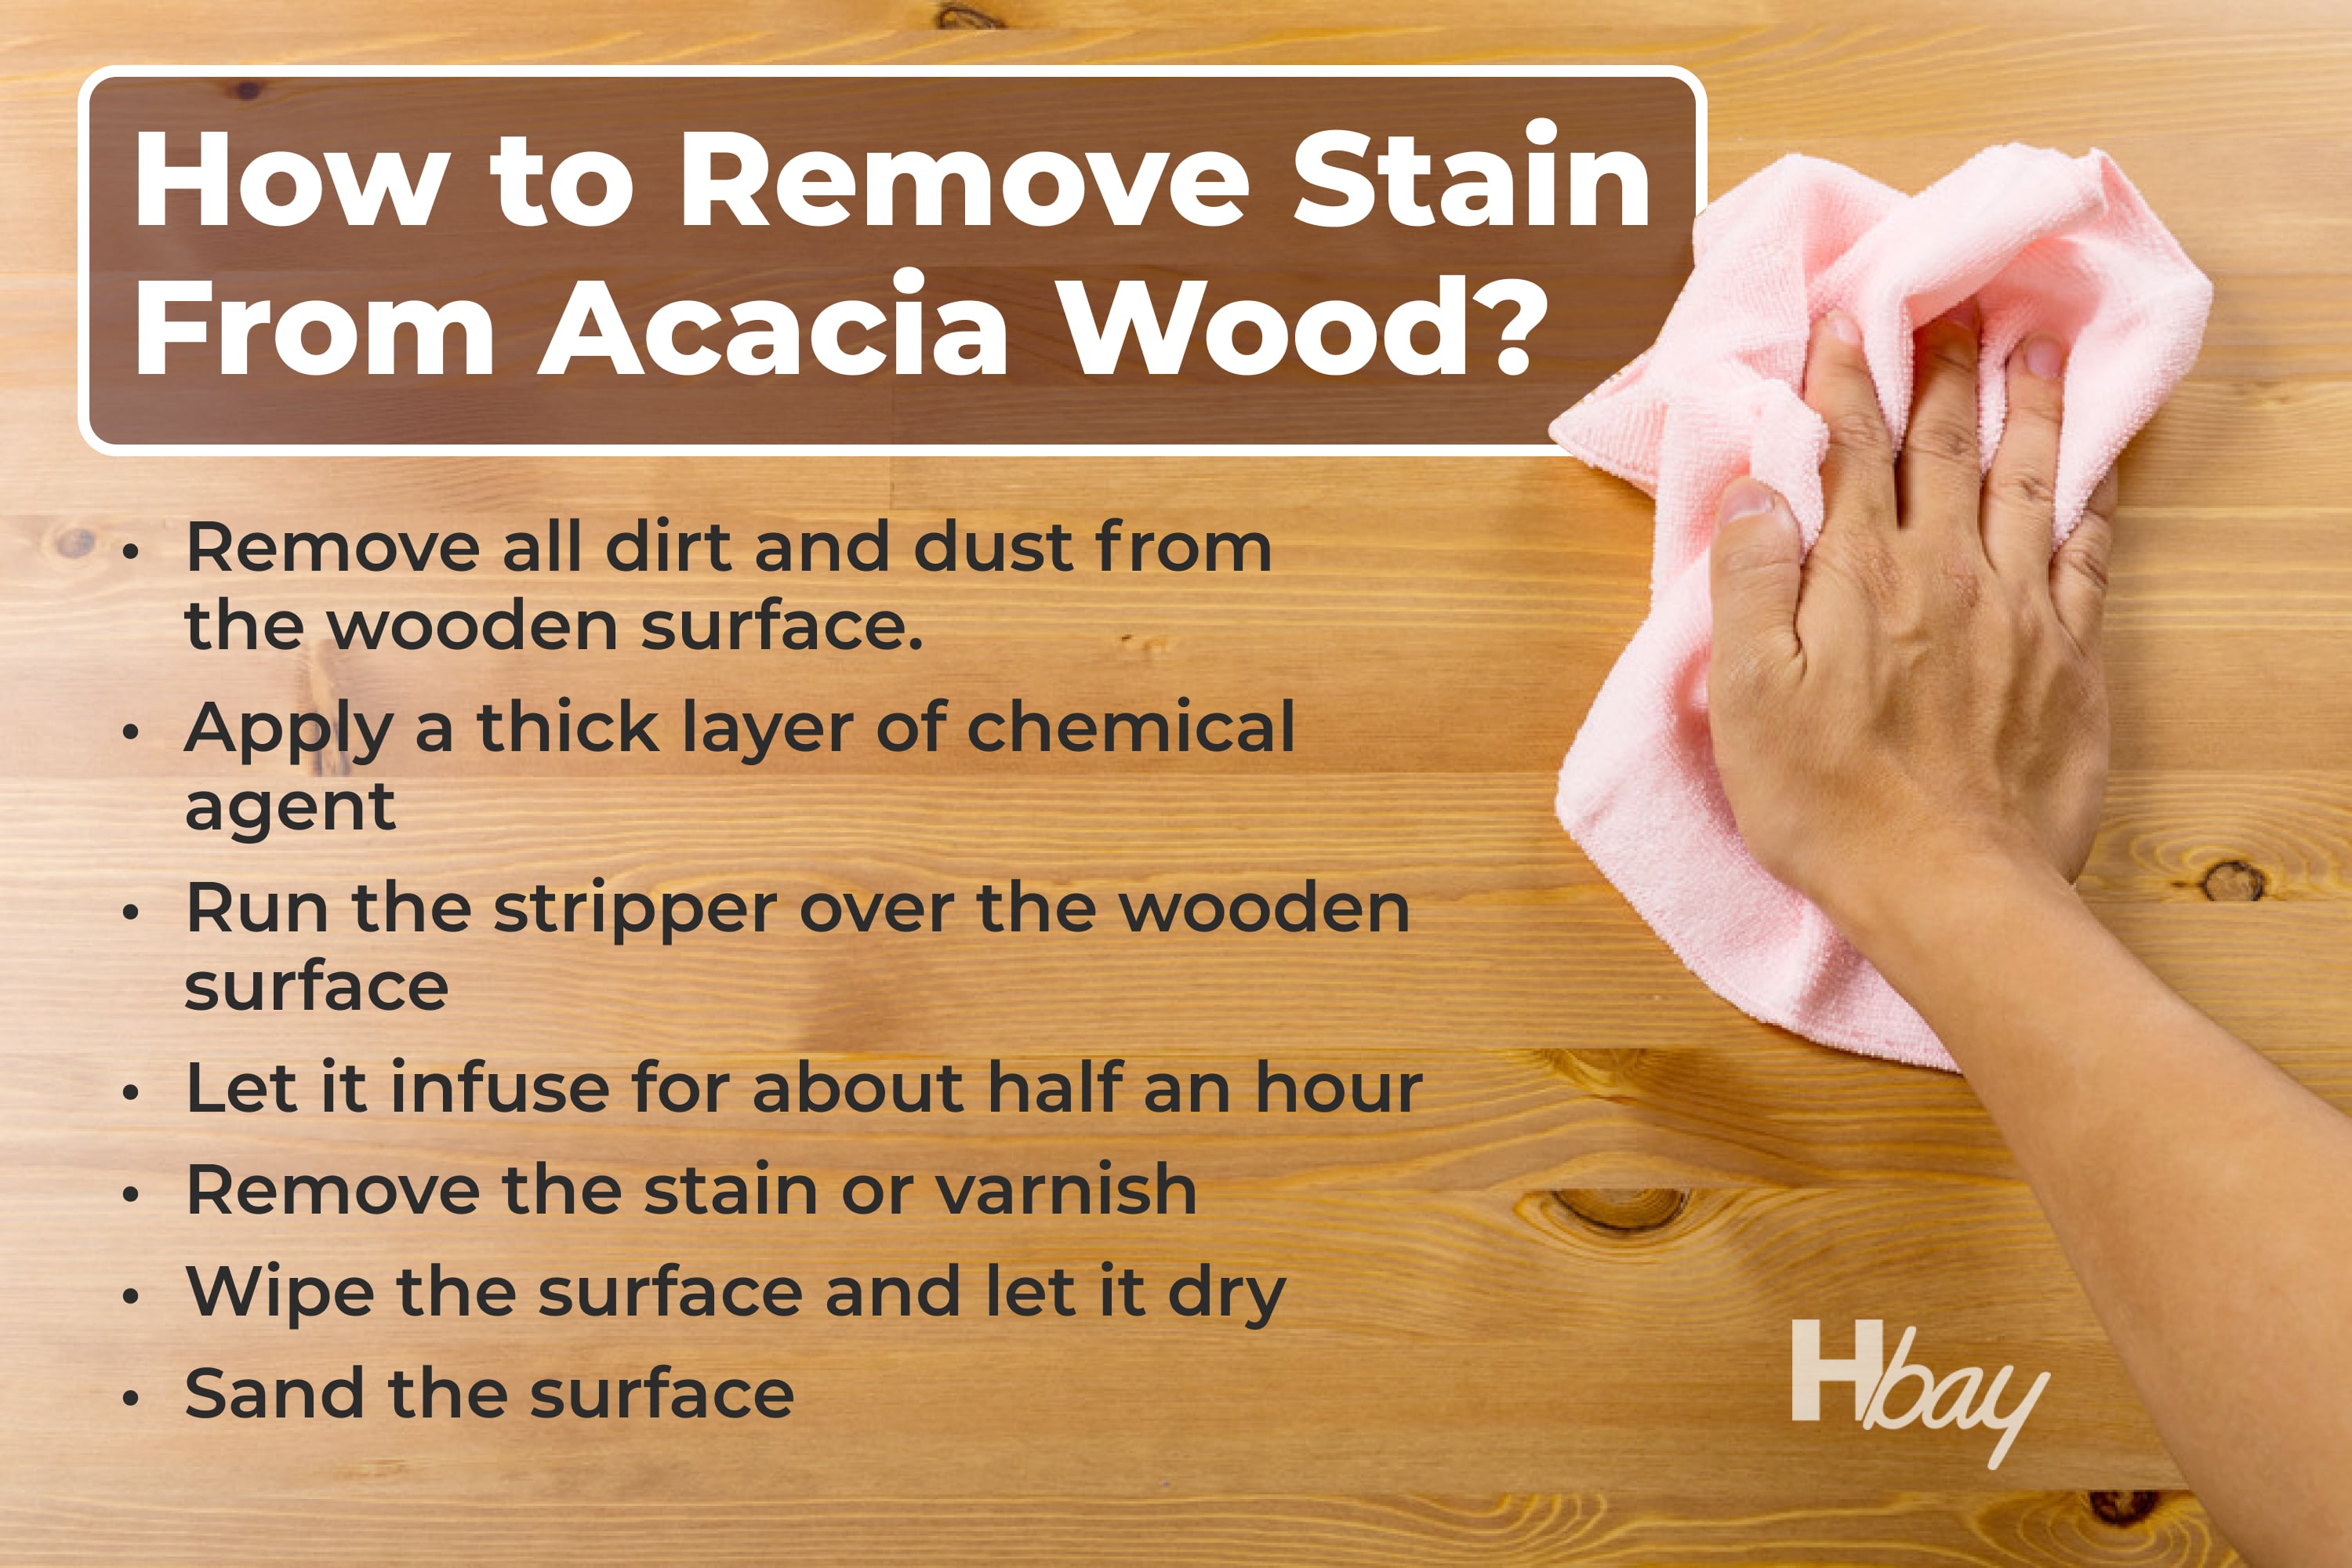 How to Remove Stain From Acacia Wood